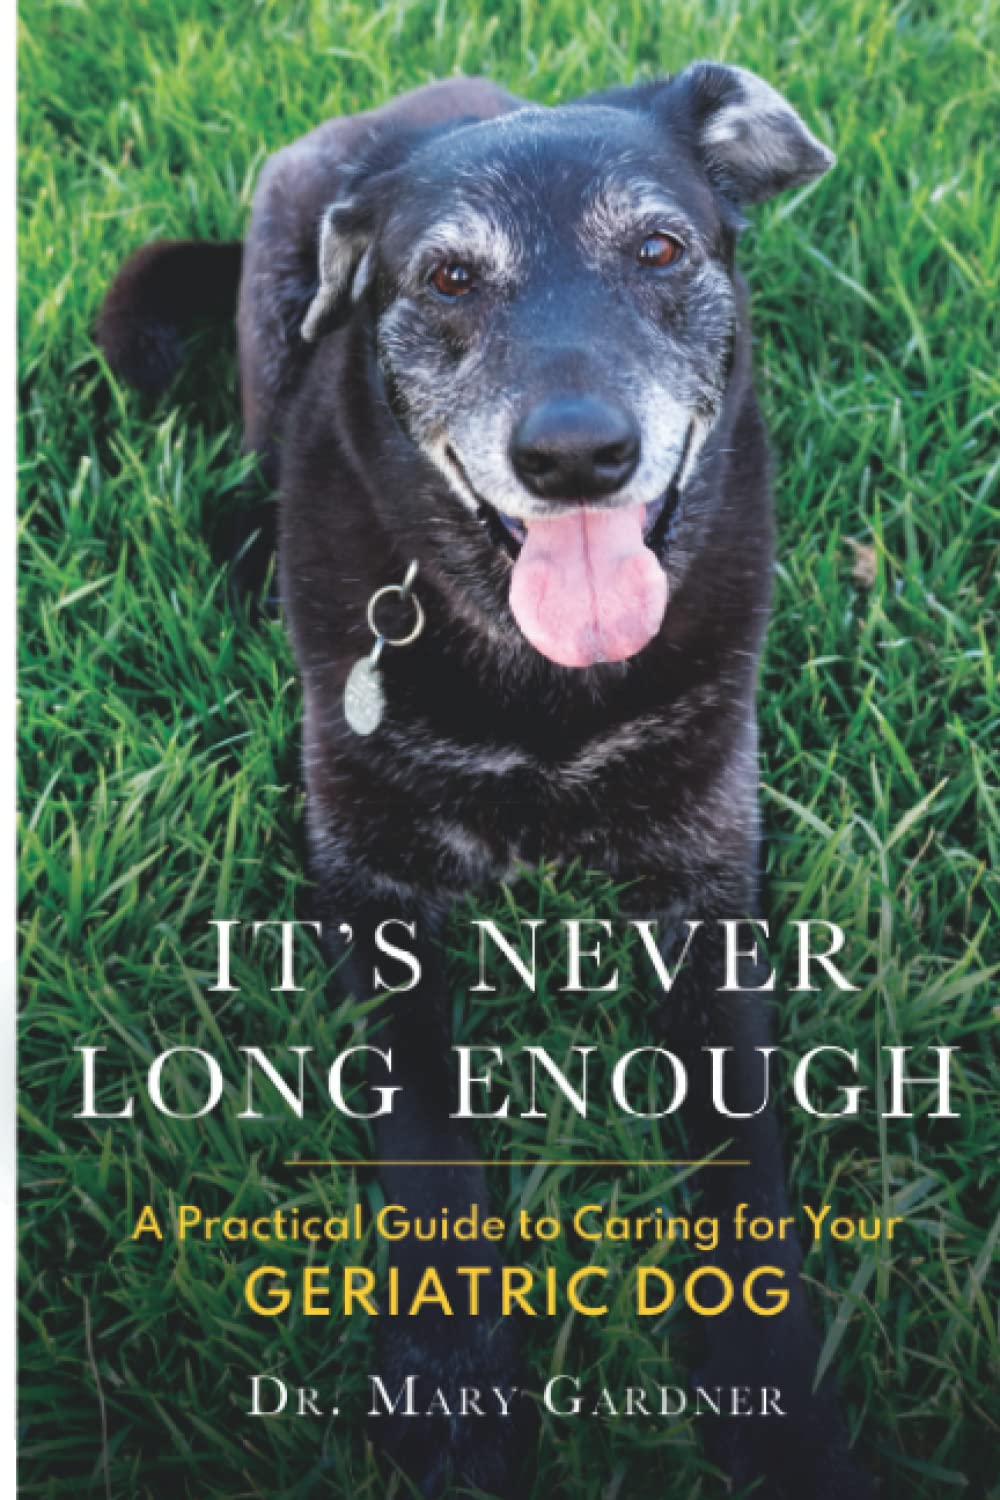 It's Never Long Enough: A practical guide to caring for your geriatric dog (Old Dog Care and Pet Loss)